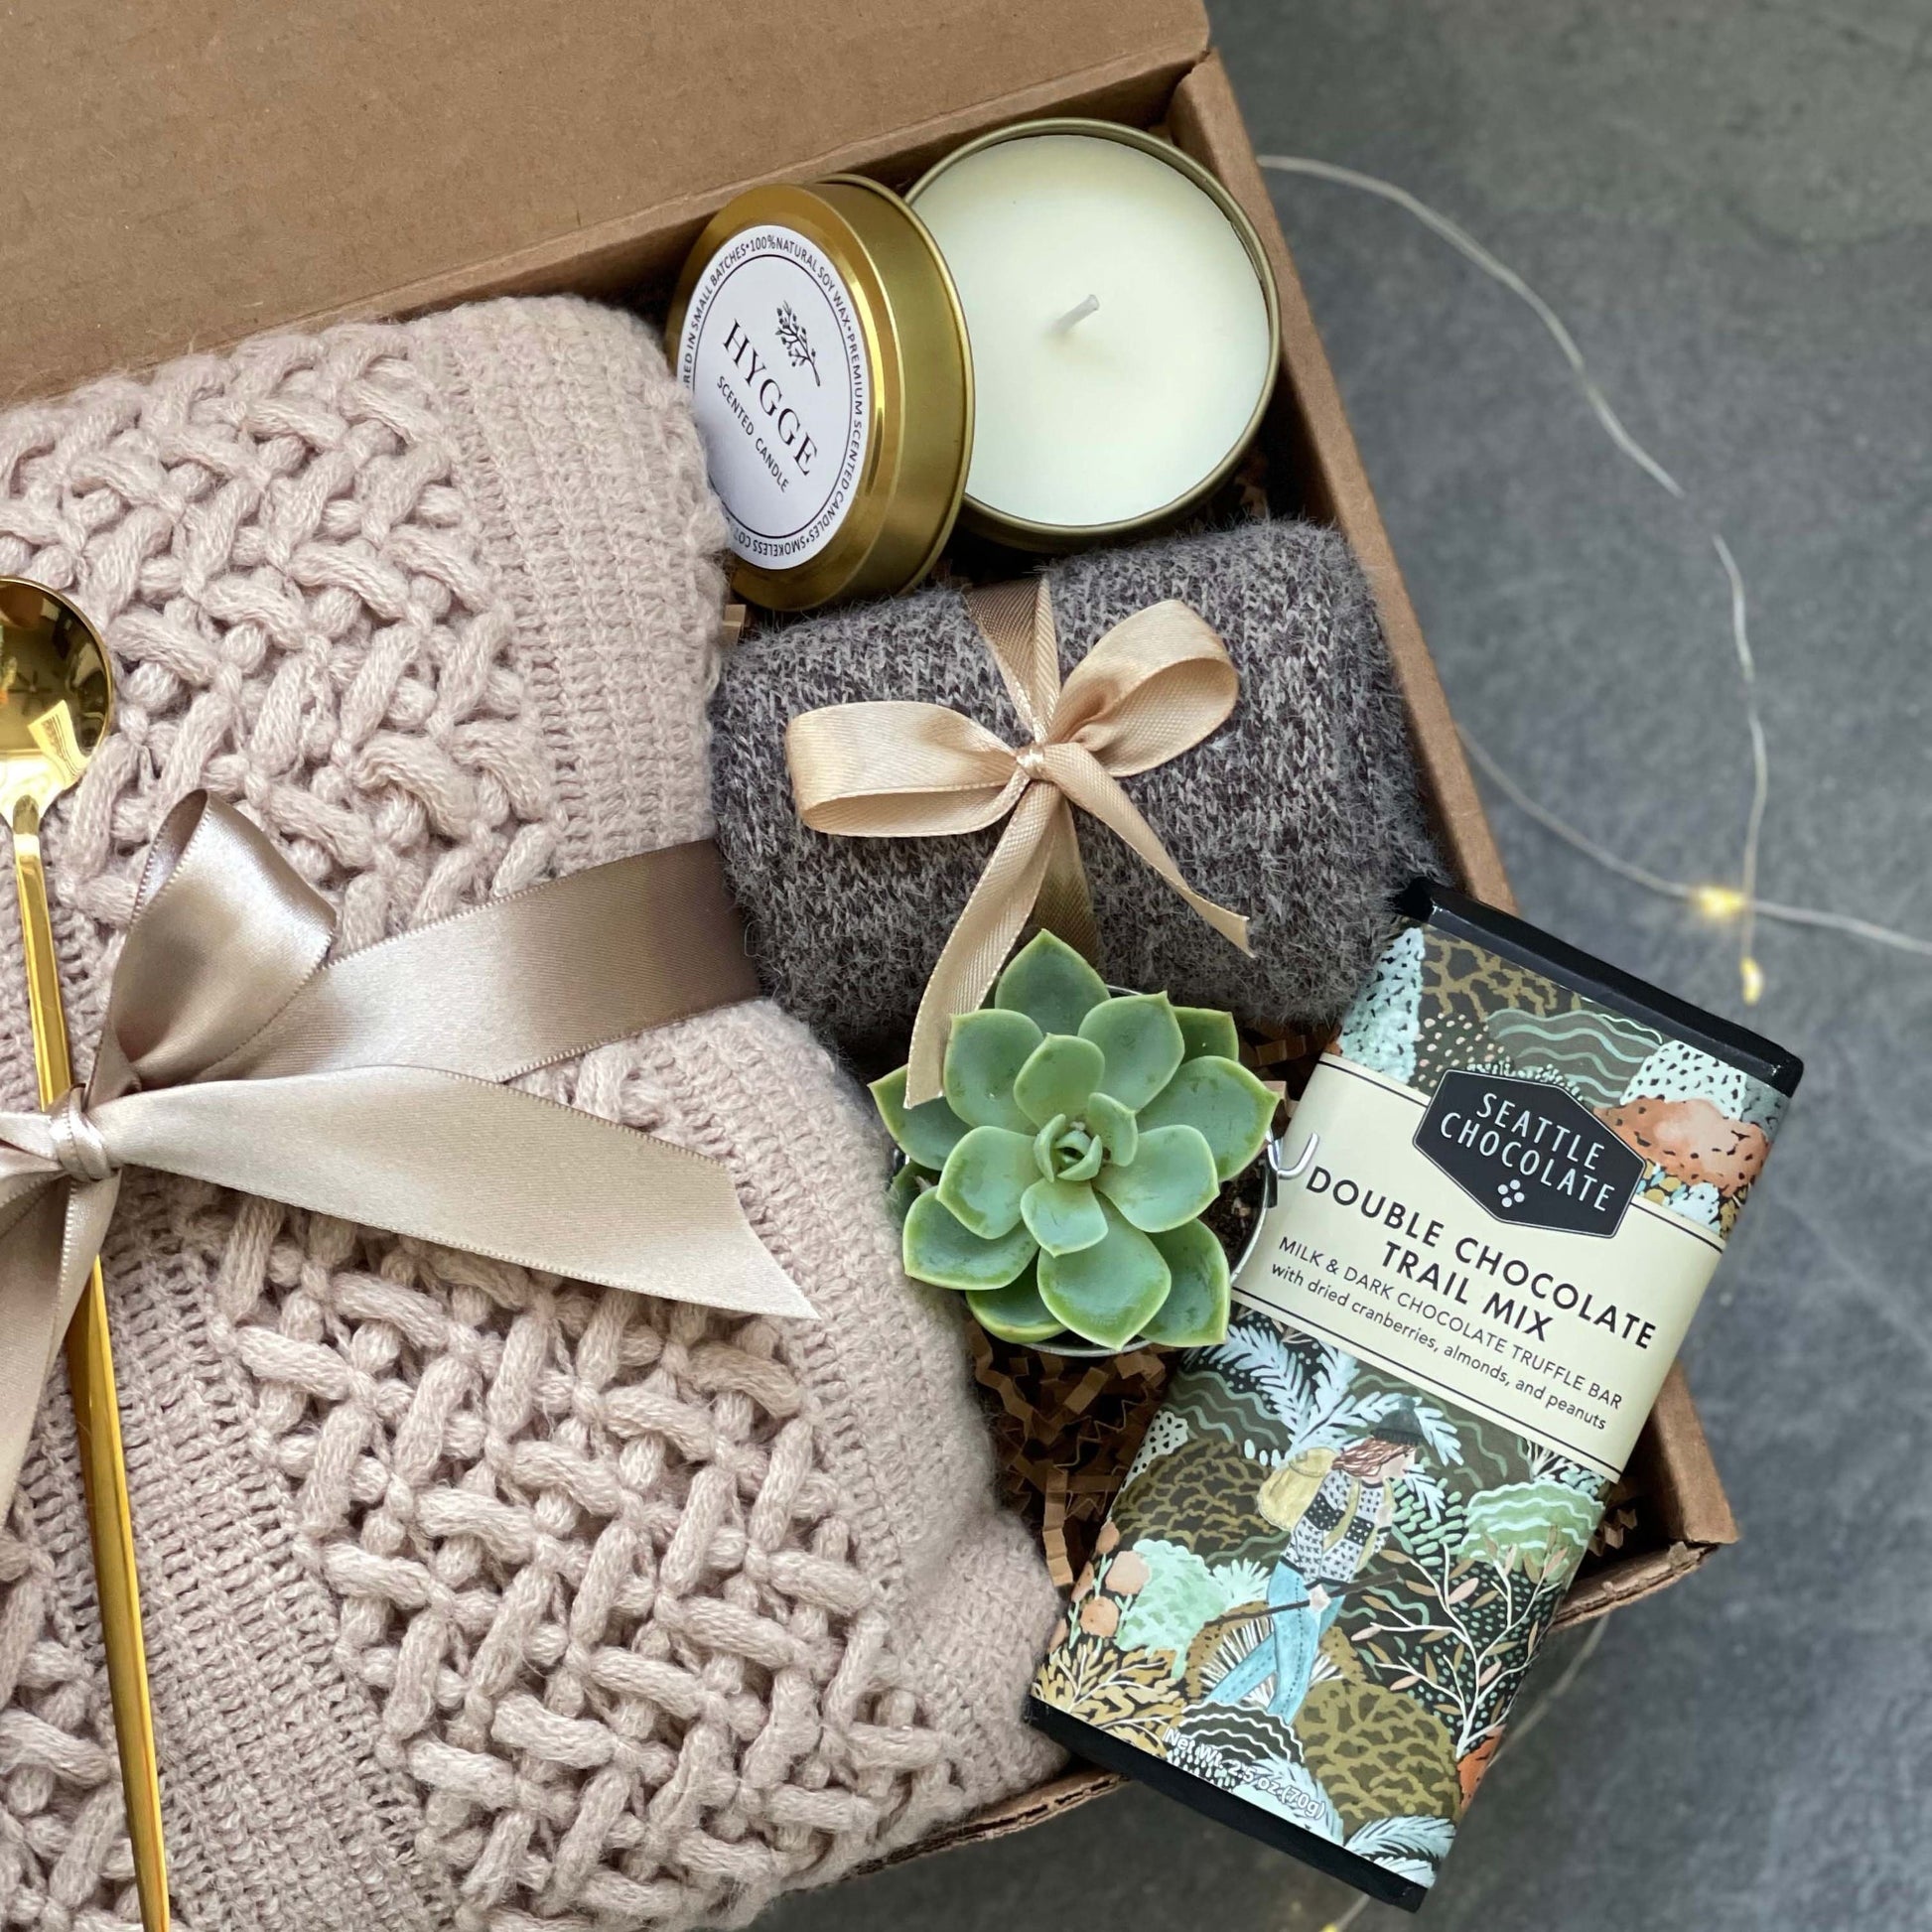 Extra Special Gift Box for Women | Cozy Gift Basket with Blanket, Socks,  Succulent | Get Well Gift, Thinking Of You Care Package for Her